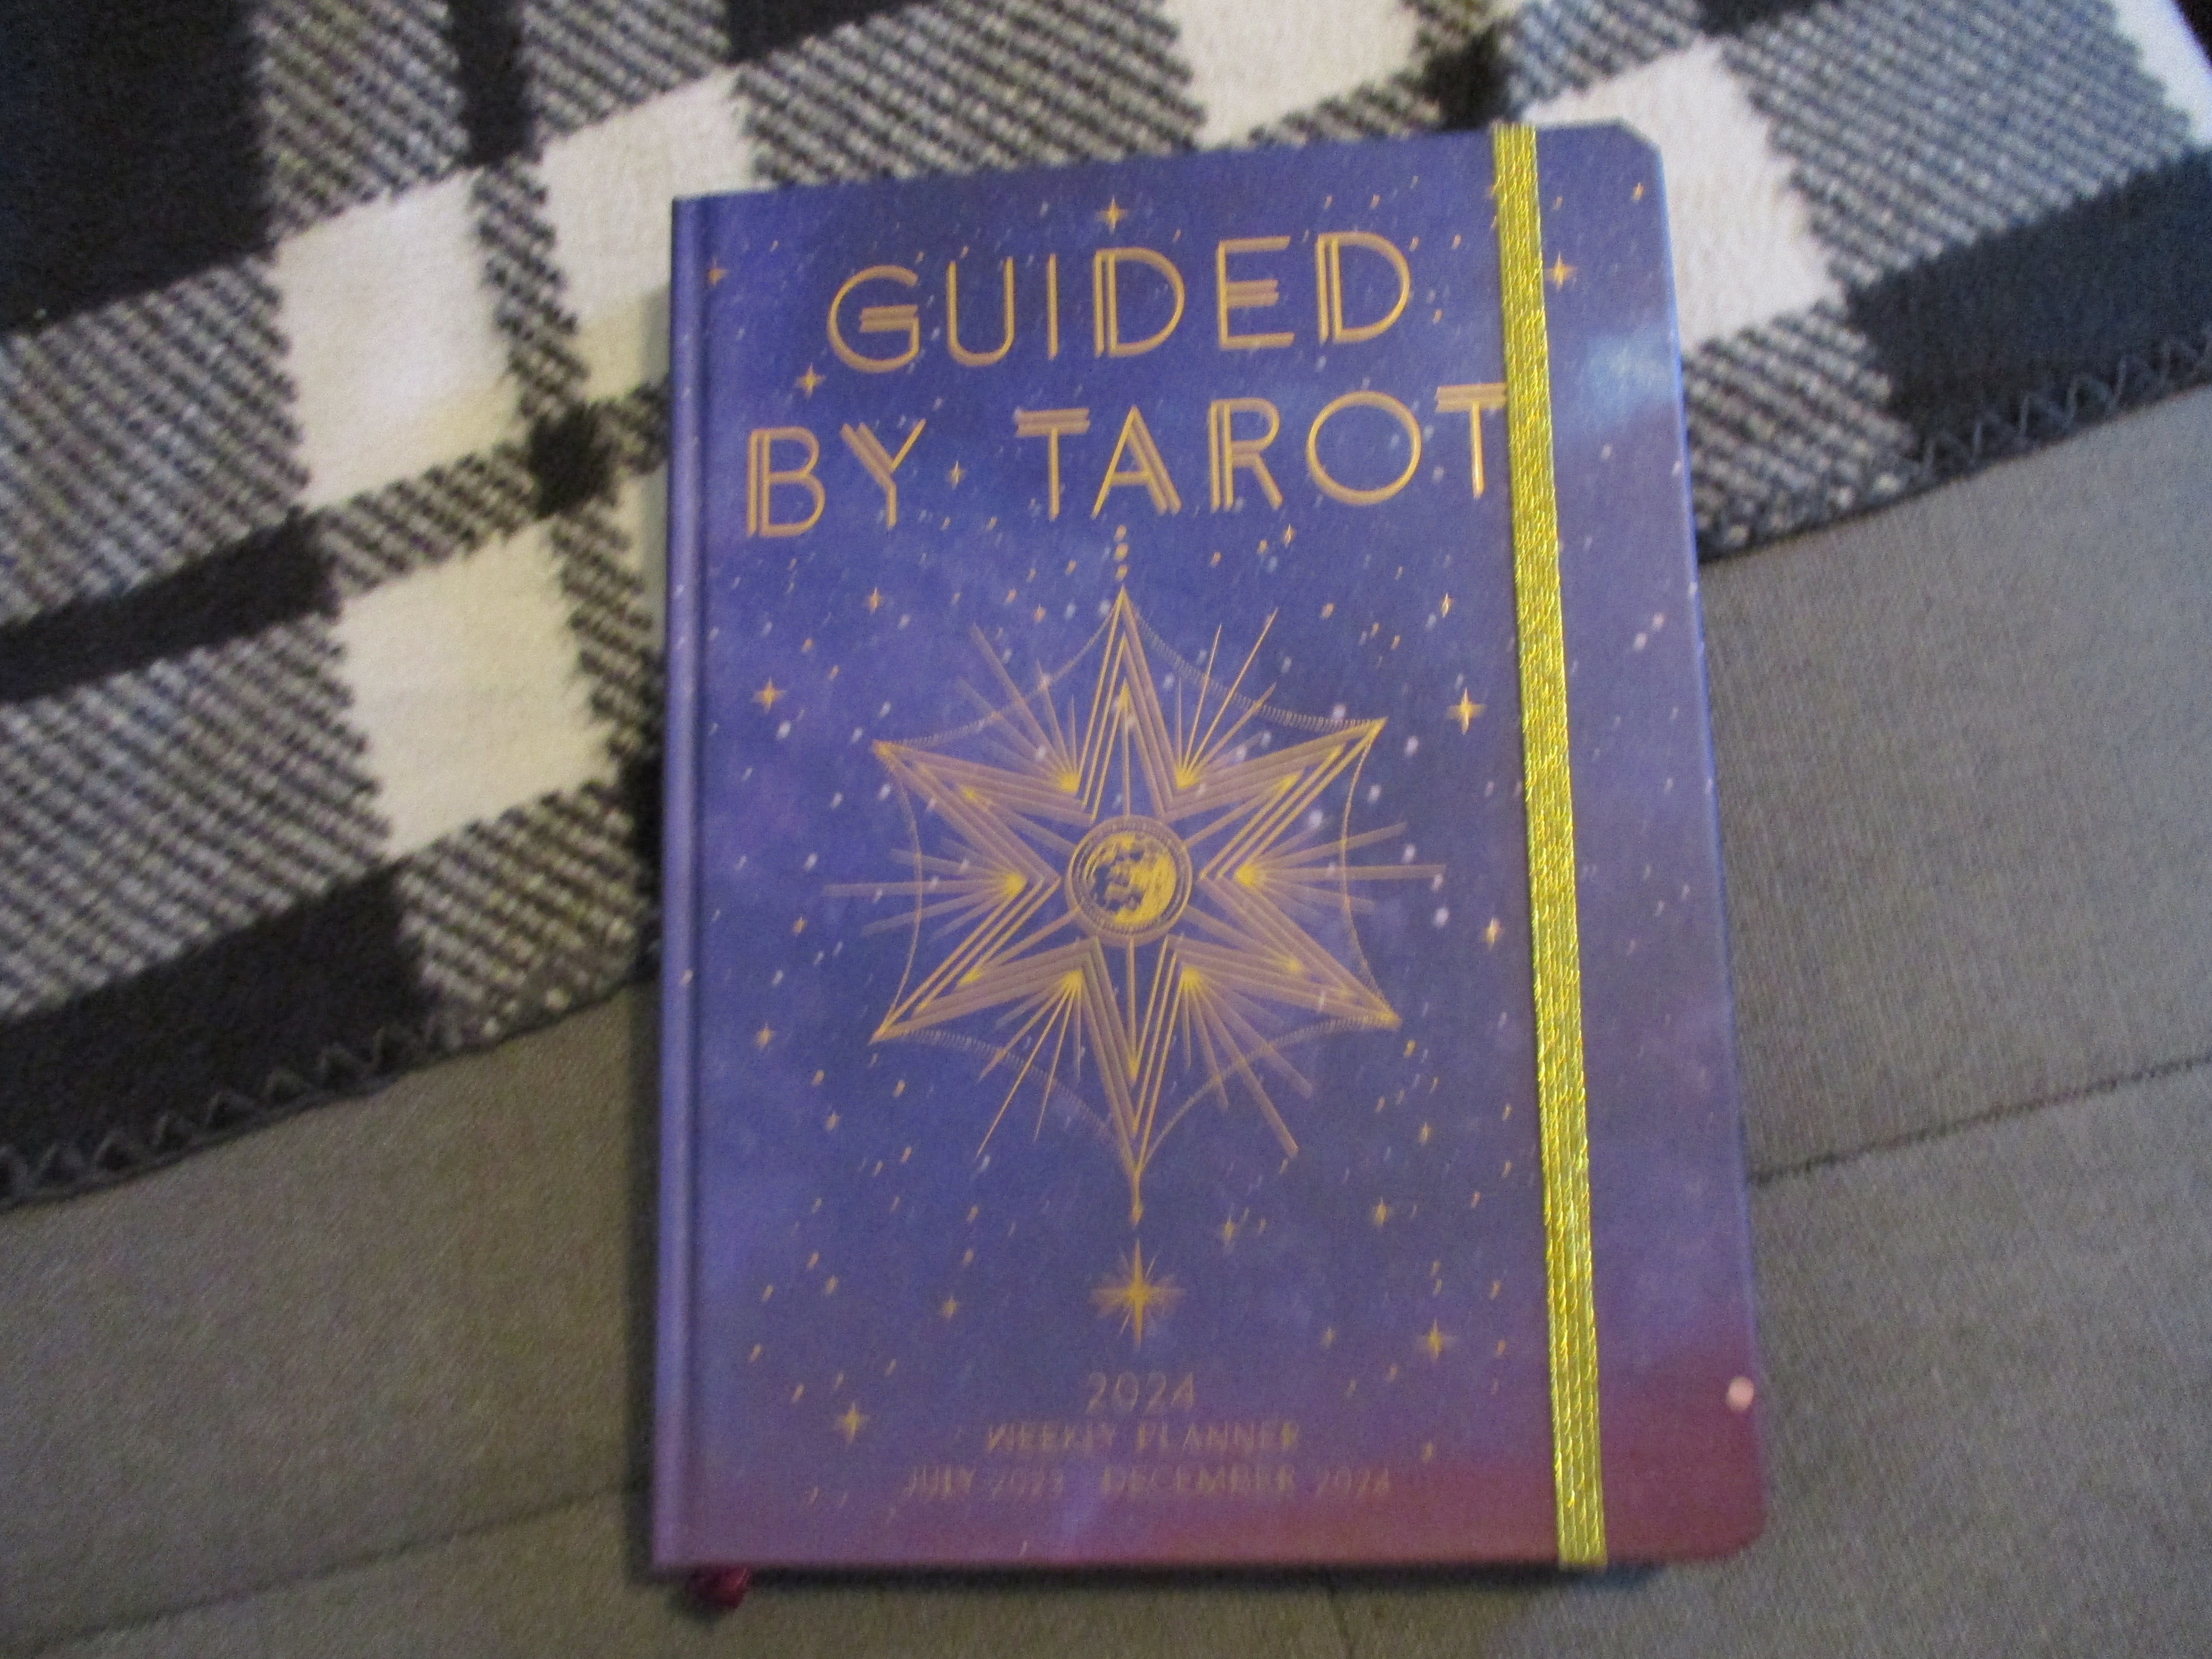 Missy's Product Reviews : Guided By Tarot 2024 Weekly Planner Holiday Gift  Guide 2023